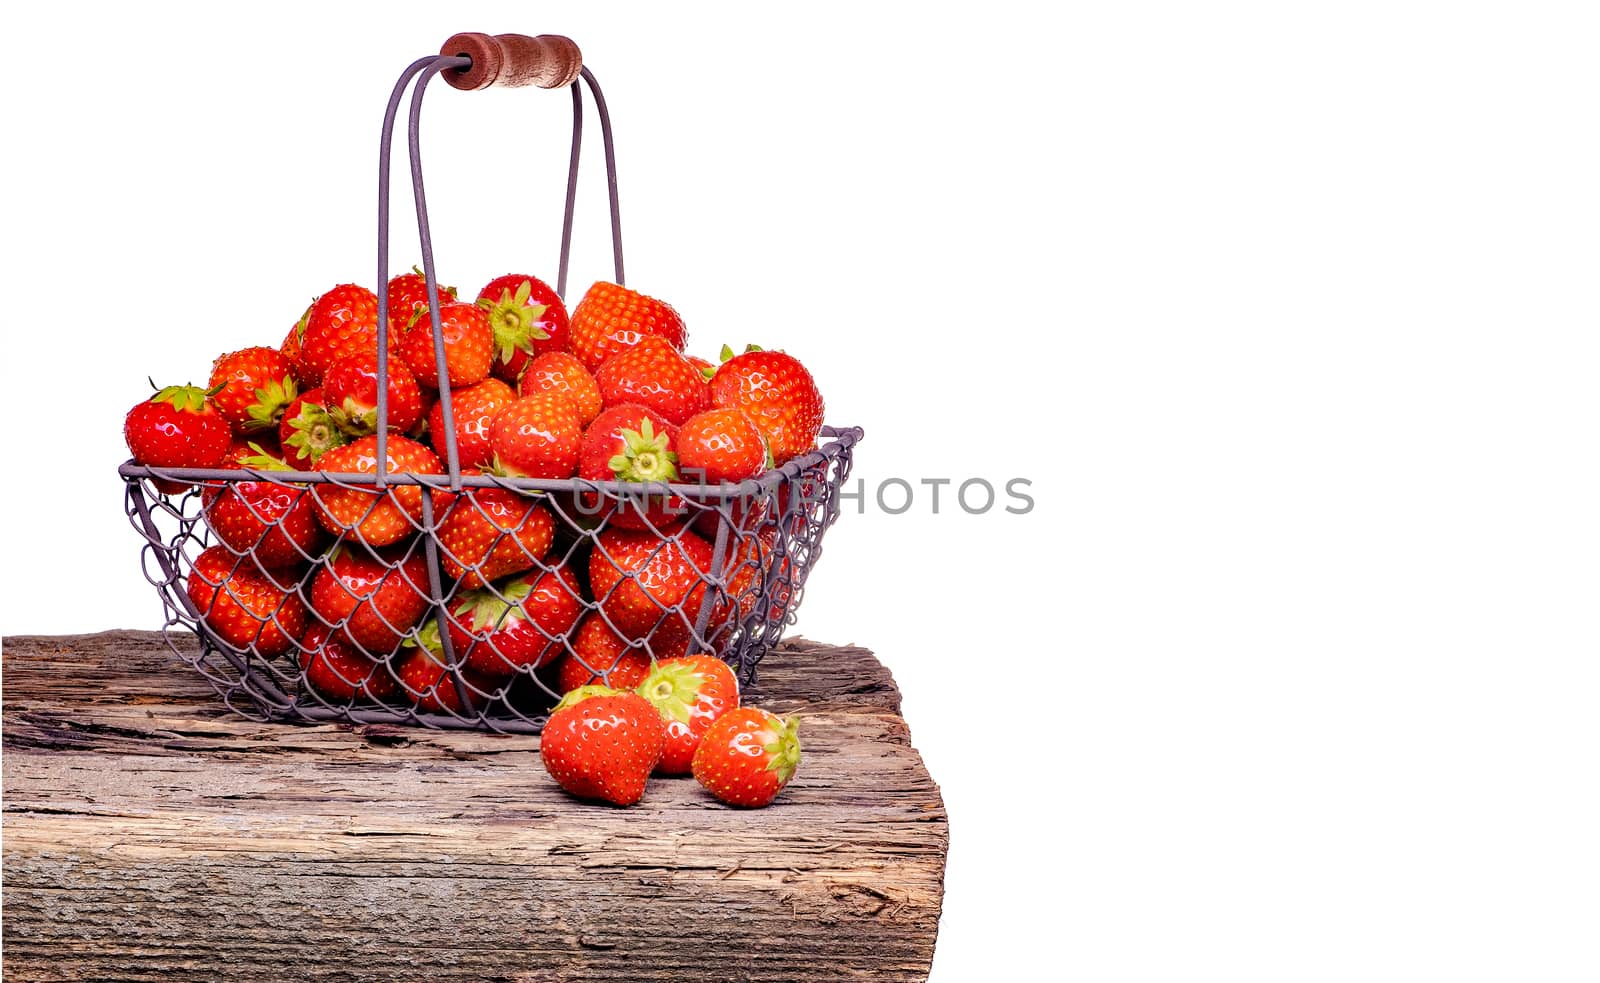 Strawberry with strawberry leaf in a metal basket on white background. by Fischeron